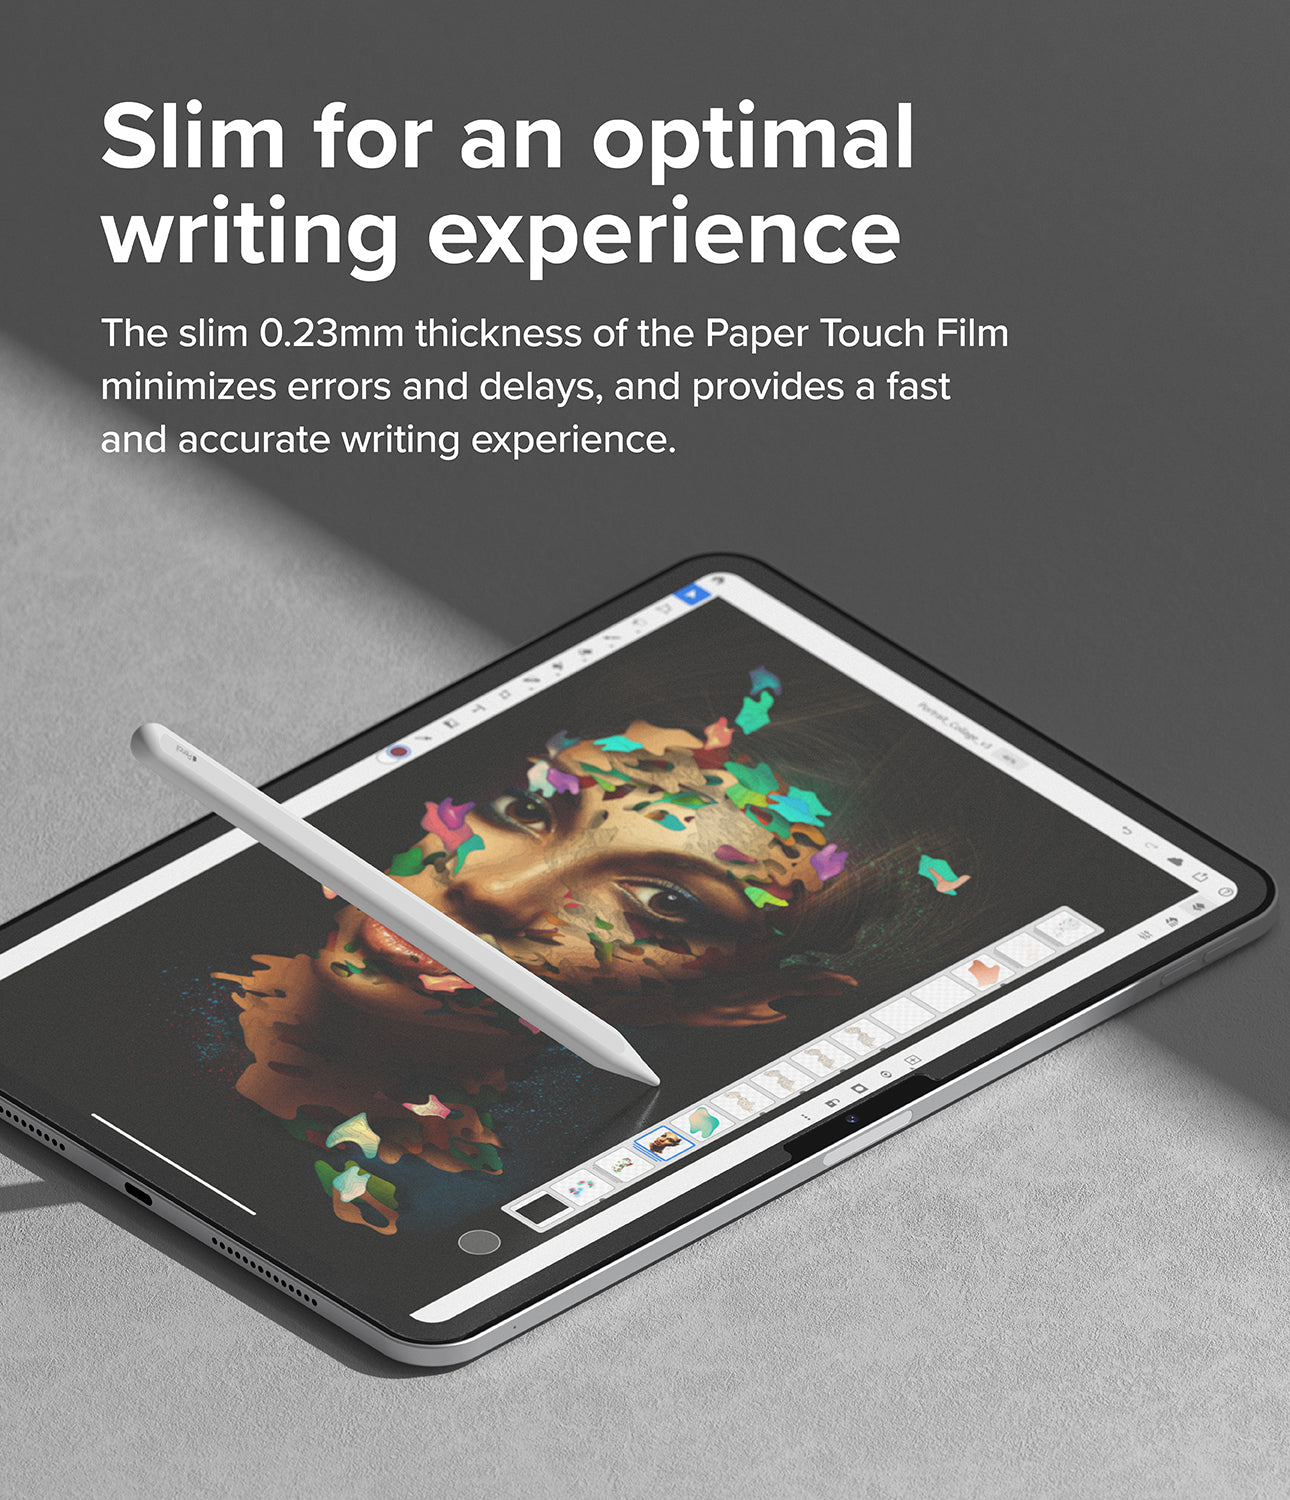 iPad Pro 11" (M4) Screen Protector | Paper Touch Film - Slim for an optimal writing experience. The slim 0.23mm thickness of the Paper Touch Film minimizes errors and delays, and provides a fast and accurate writing experience.